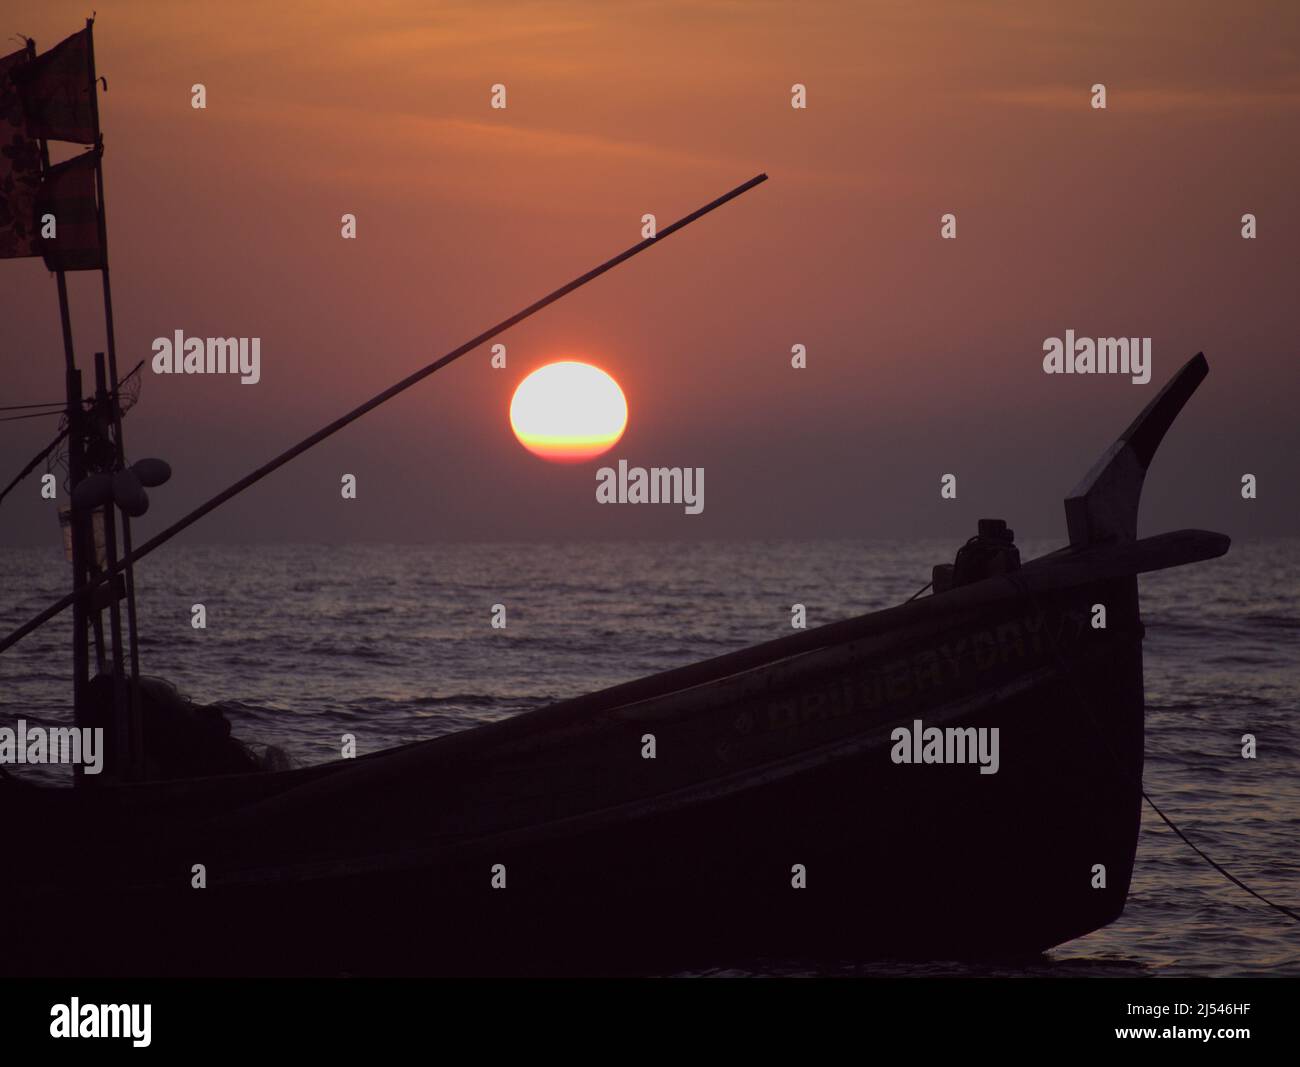 The sun sets behind the silhoutte of a local Balami Nouka fishing boat off Cox's Bazar beach, Bangladesh Stock Photo